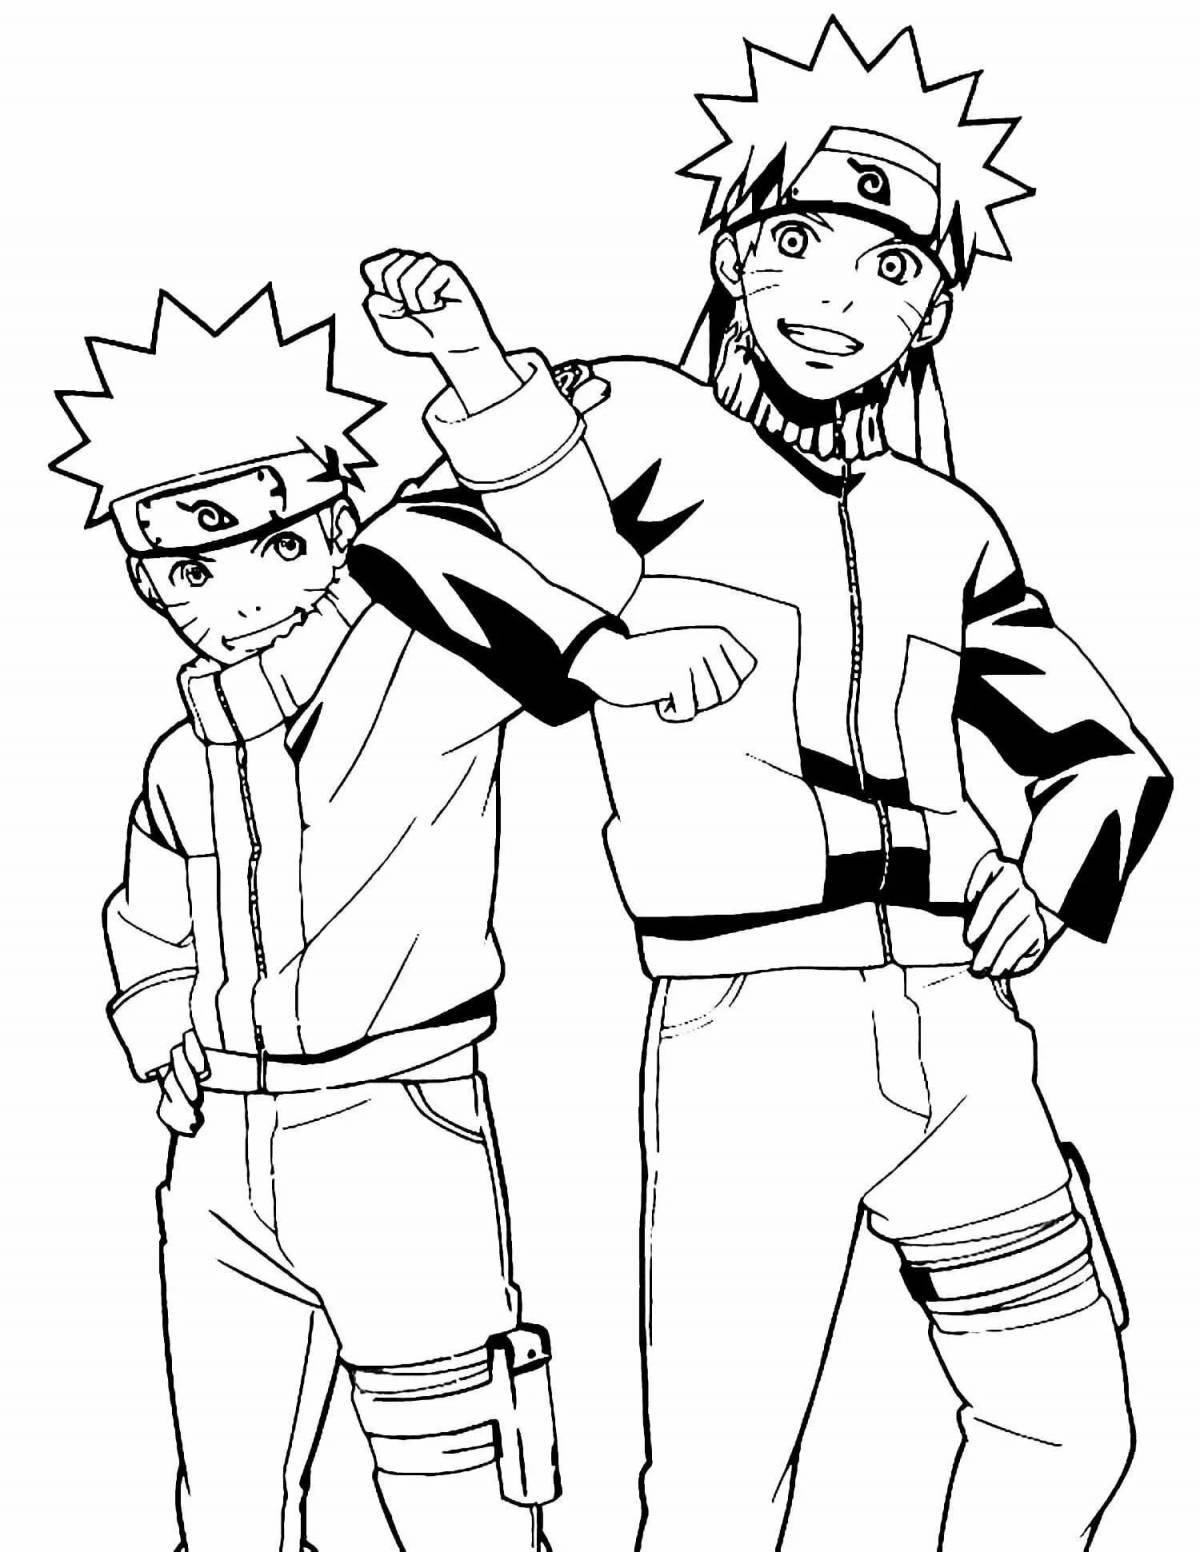 Naruto's colorful coloring game